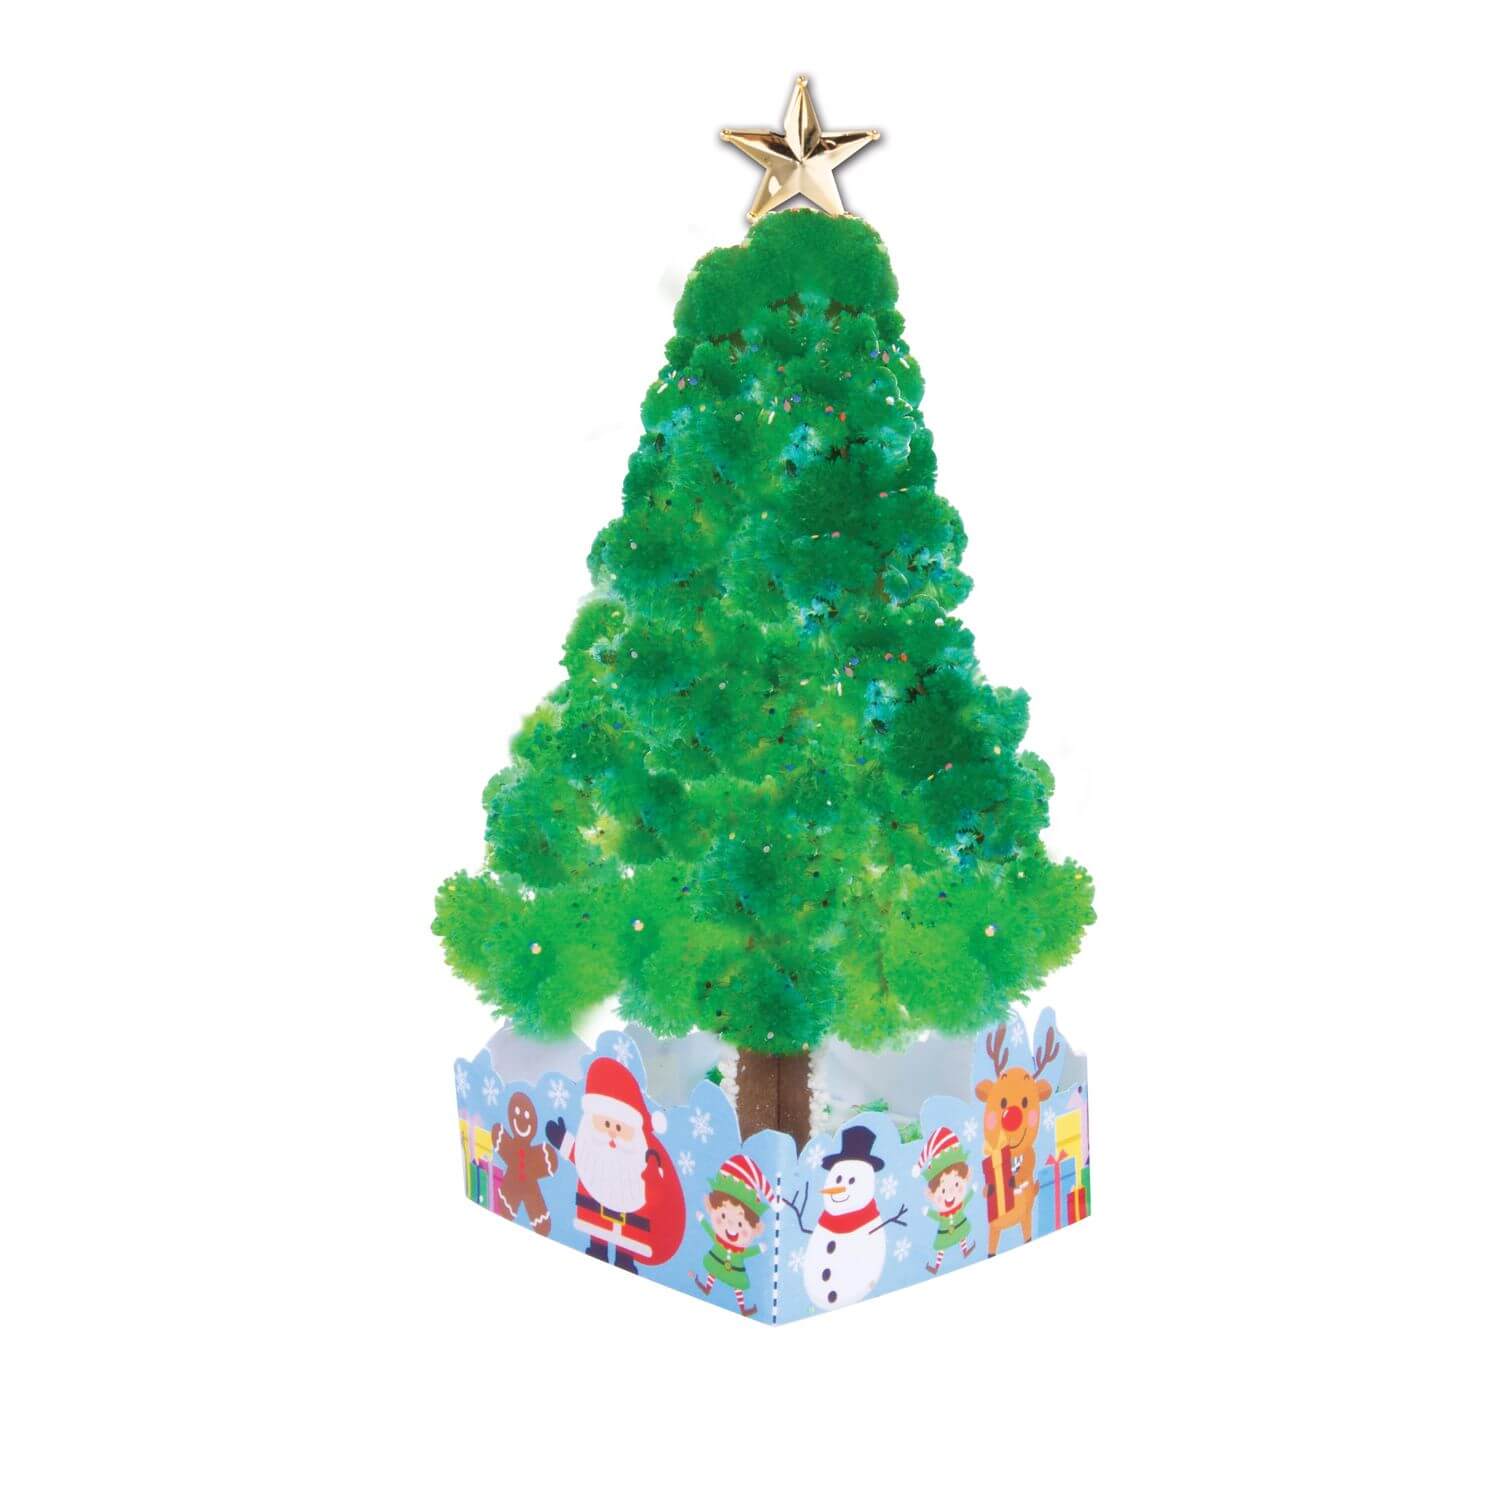 A green grow your own Christmas tree with a gold star